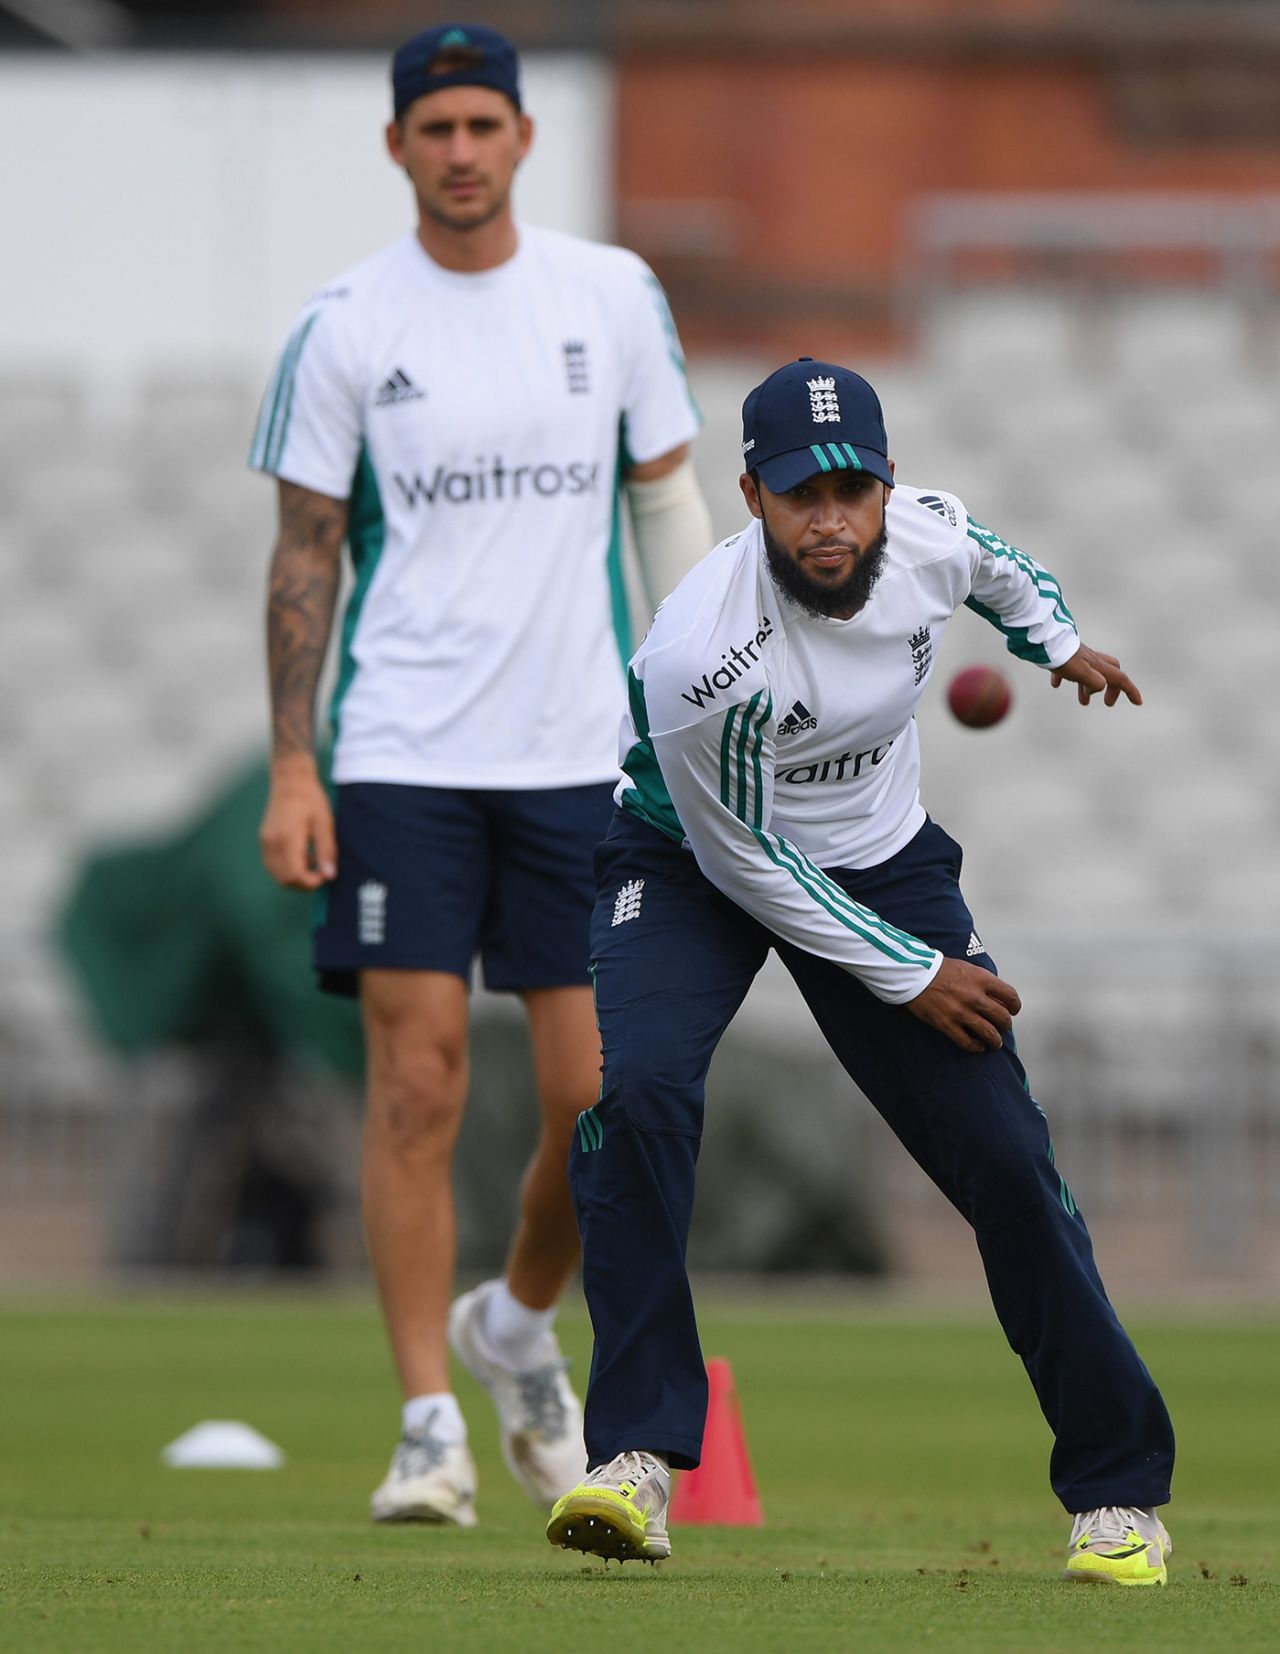 Adil Rashid practices the day before the Test, as Alex Hales looks on, Old Trafford, England v Pakistan, 2nd Investec Test, Old Trafford, July 21, 2016